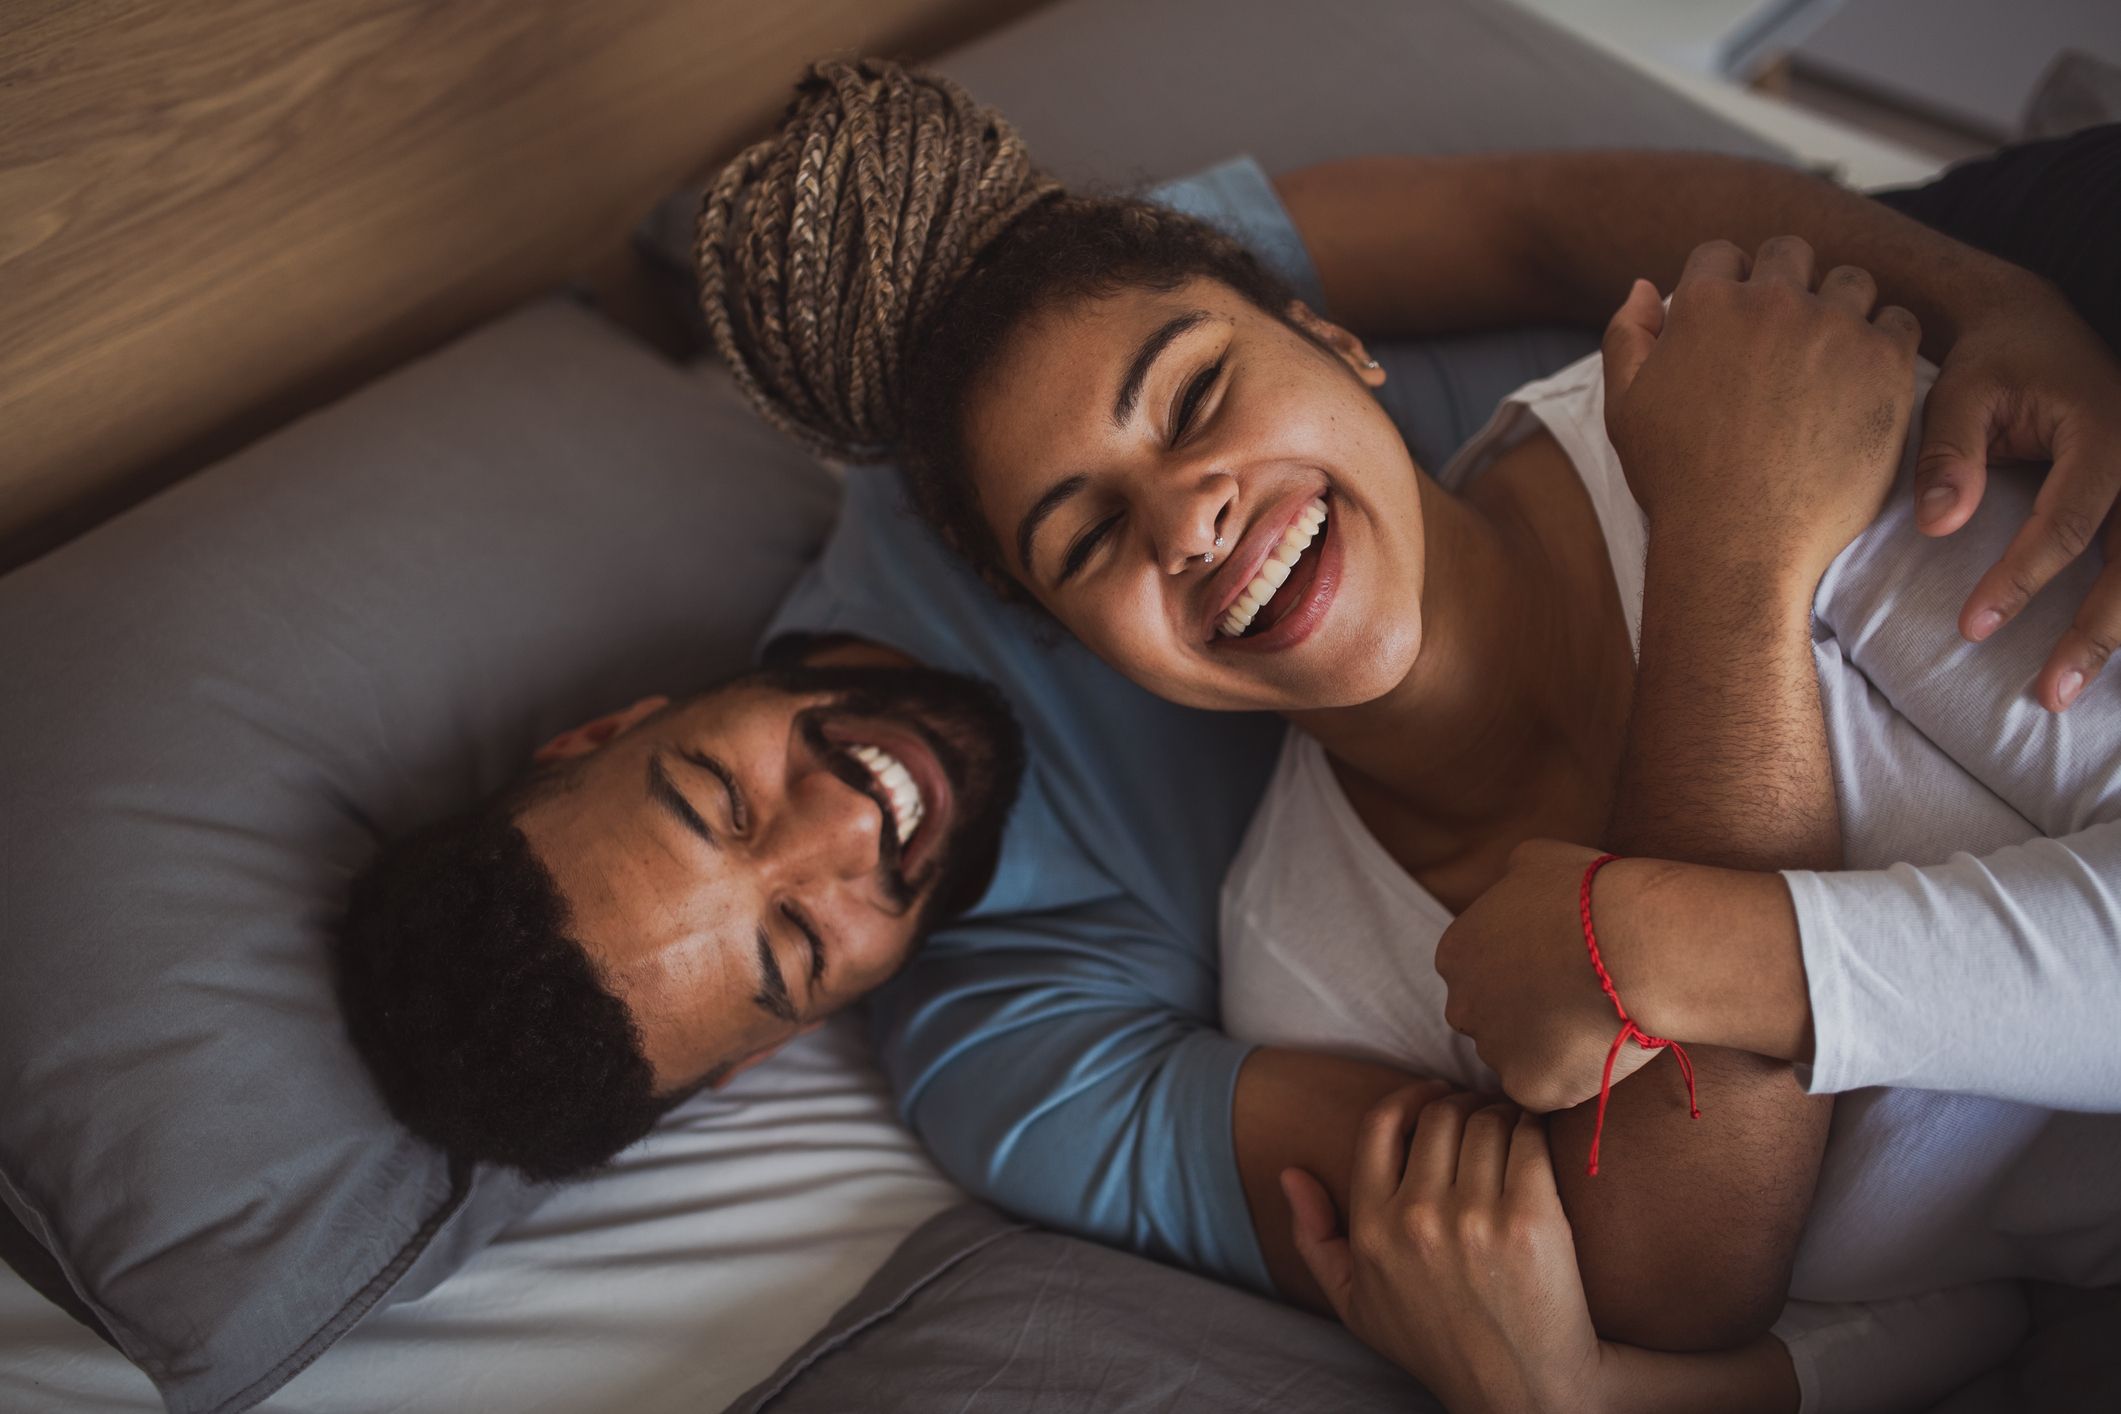 Two people smiling and hugging in bed, expressing affection and happiness